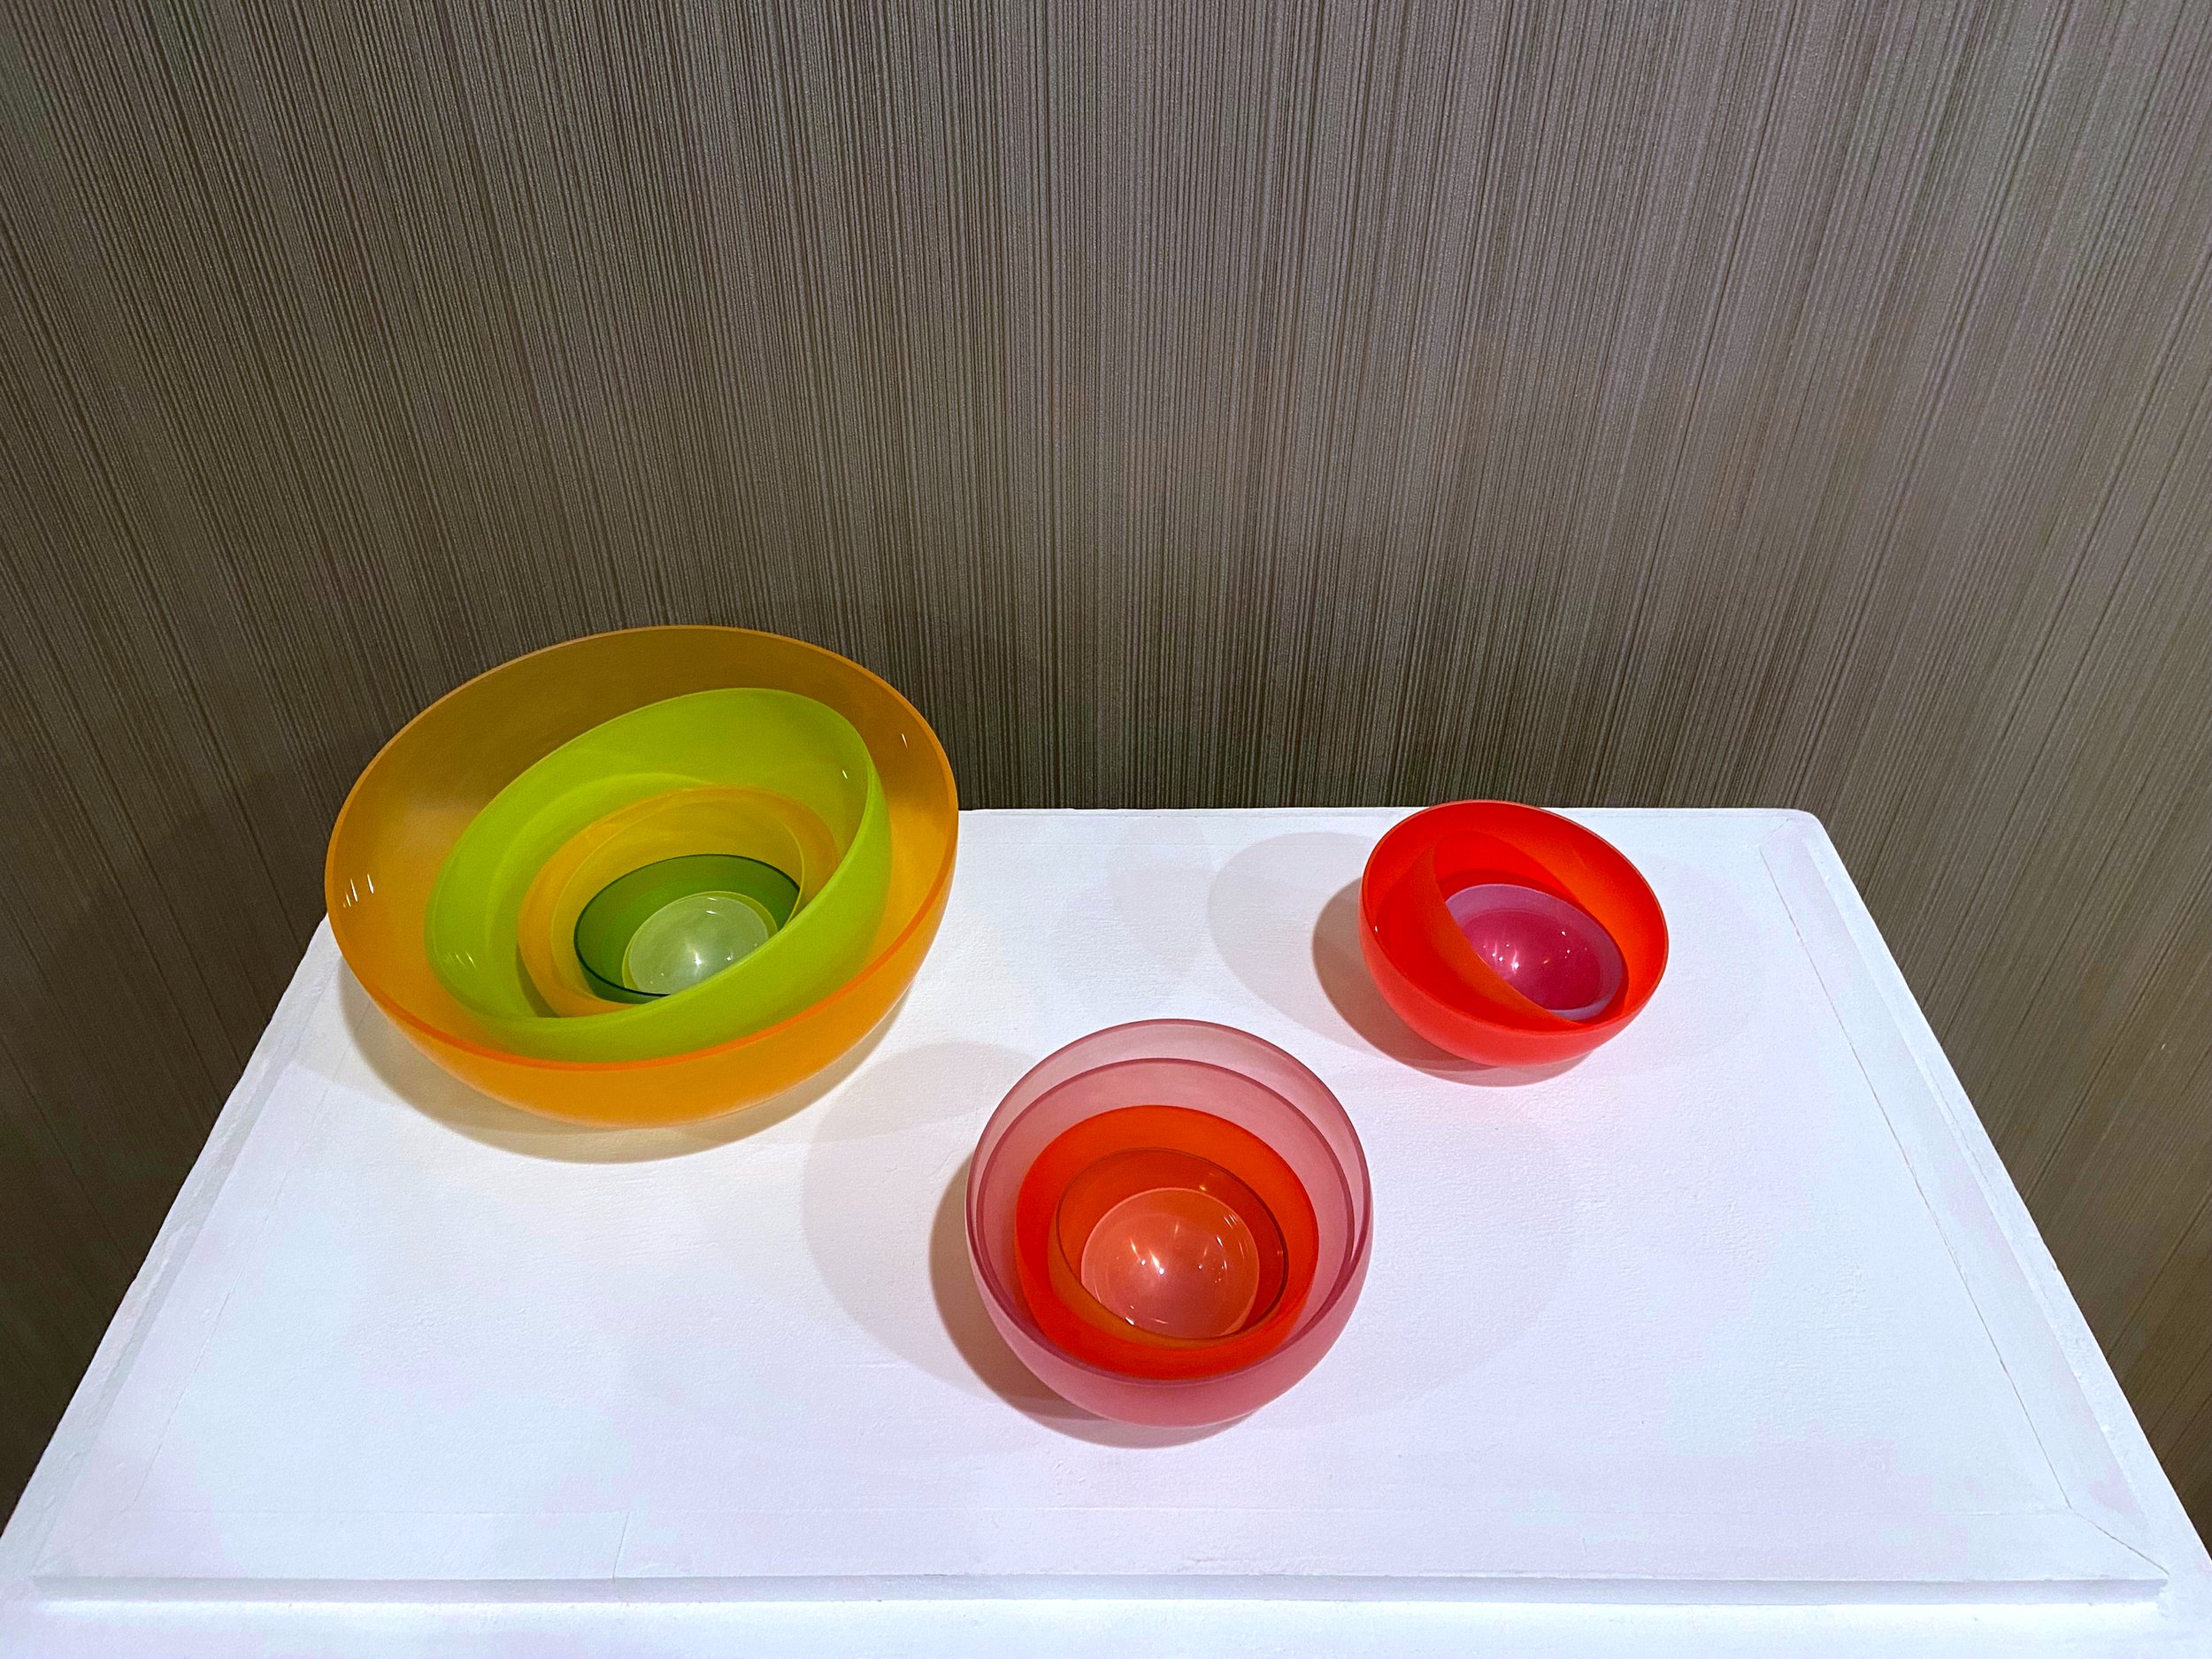  Left to right:   Nesting Set of 8 Bowls , 2024, Blown Glass, $1400.   Nesting Set of 5 Bowls 1 , 2021, Blown Glass, $600.&nbsp;   Nesting Set of 5 Bowls 2 , 2021, Blown Glass, $650.  Photographed by Emily Venne, edited by Au7umn. 